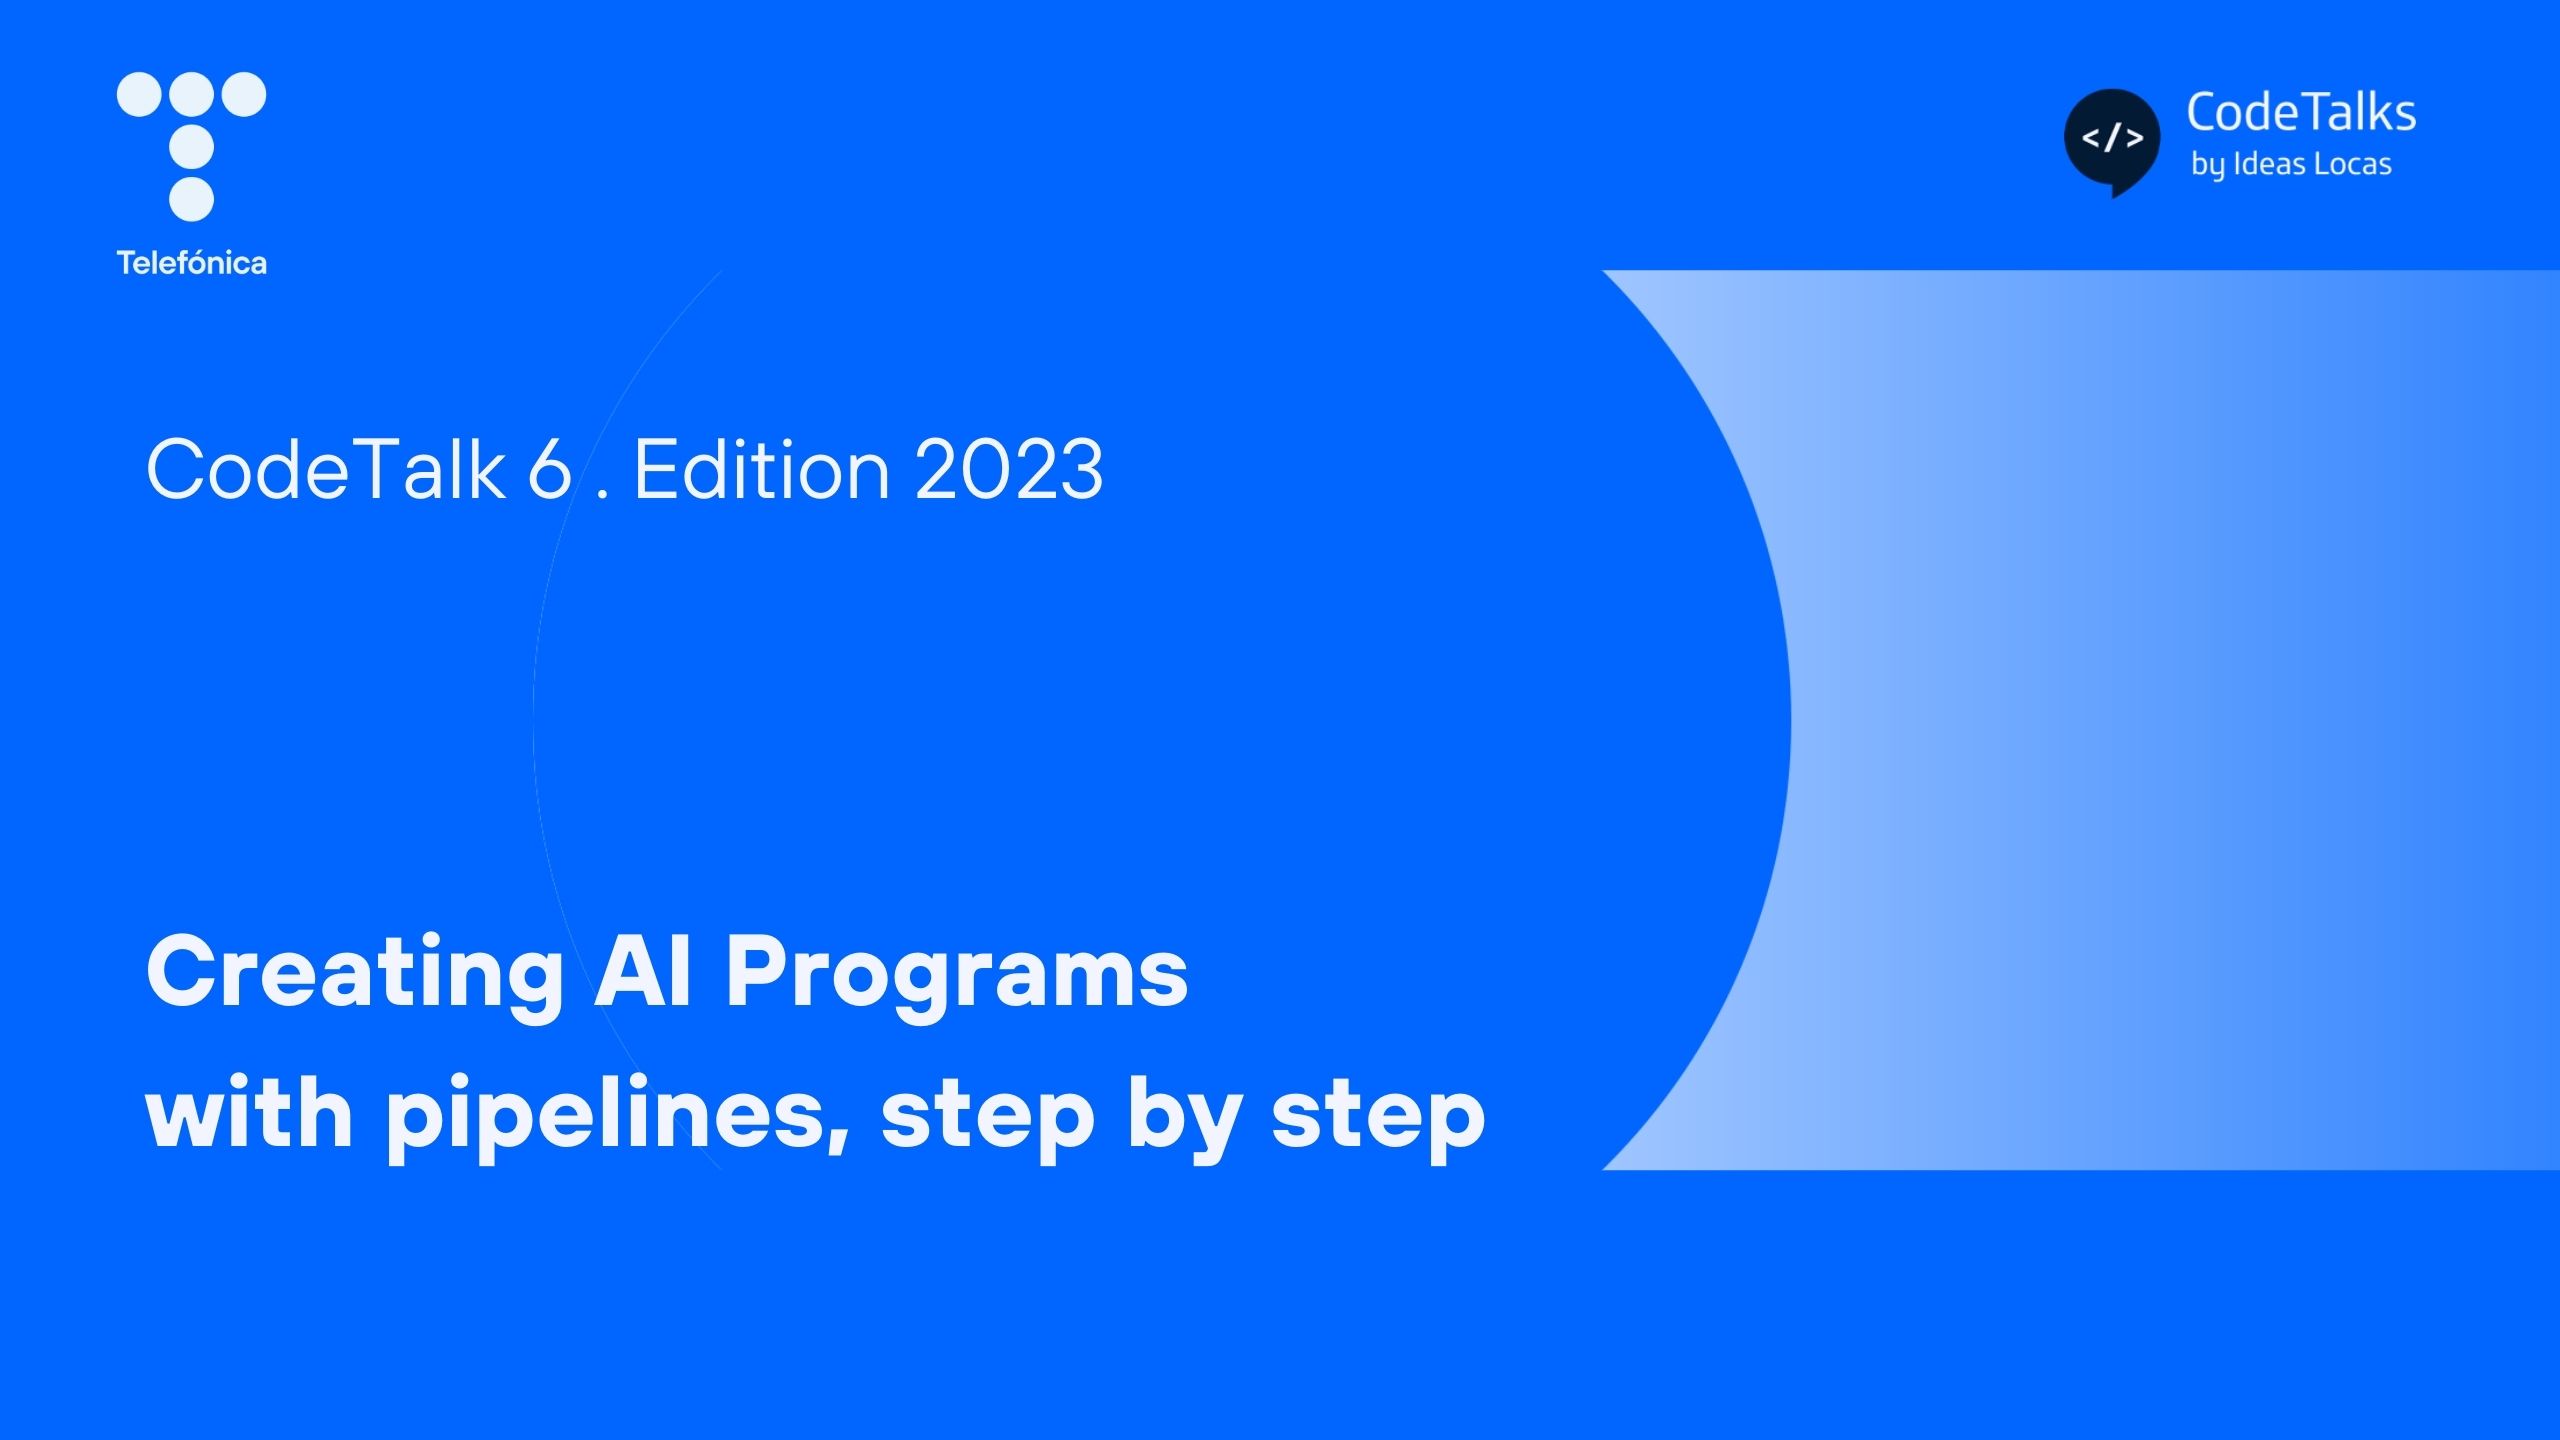 Creating AI Programs with pipelines, step by step